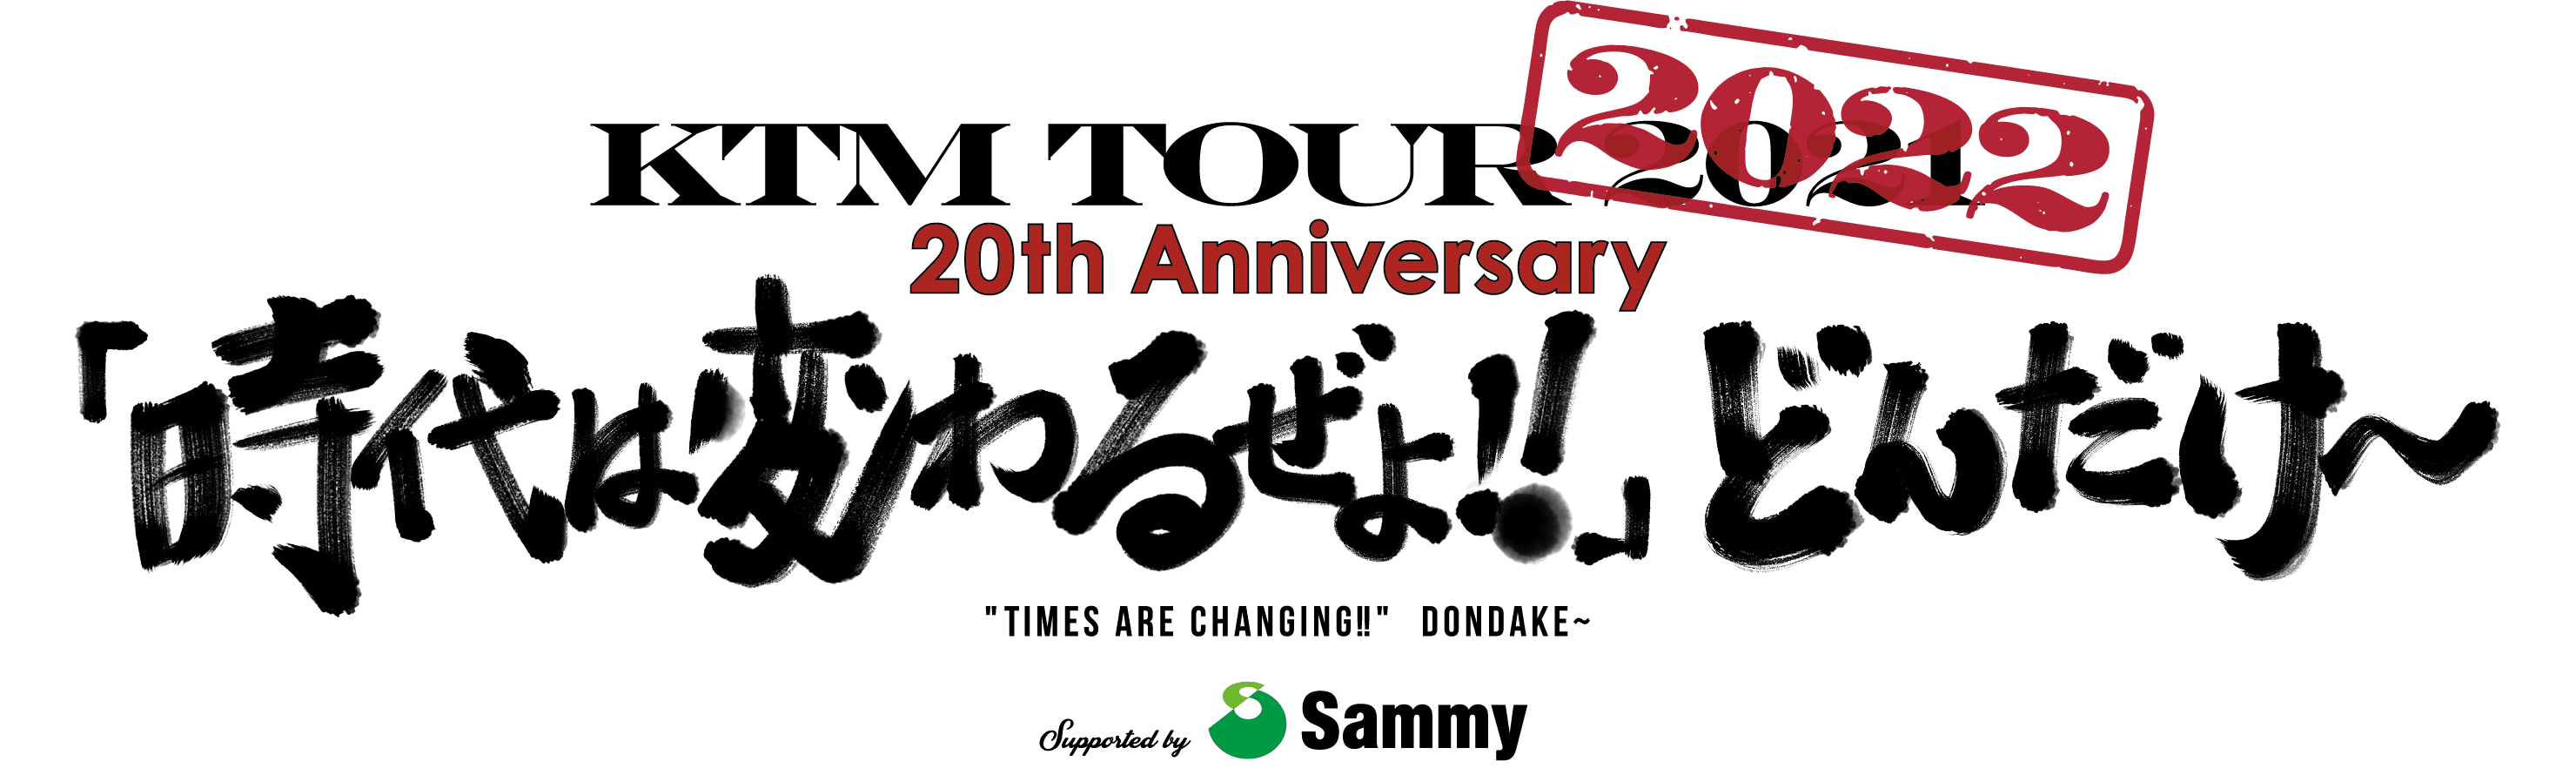 KTM TOUR 2022 20th Anniversary「時代は変わるぜよ！！」どんだけ〜 “TIMES ARE CHANGING!!”DONDAKE〜 Supported by Sammy